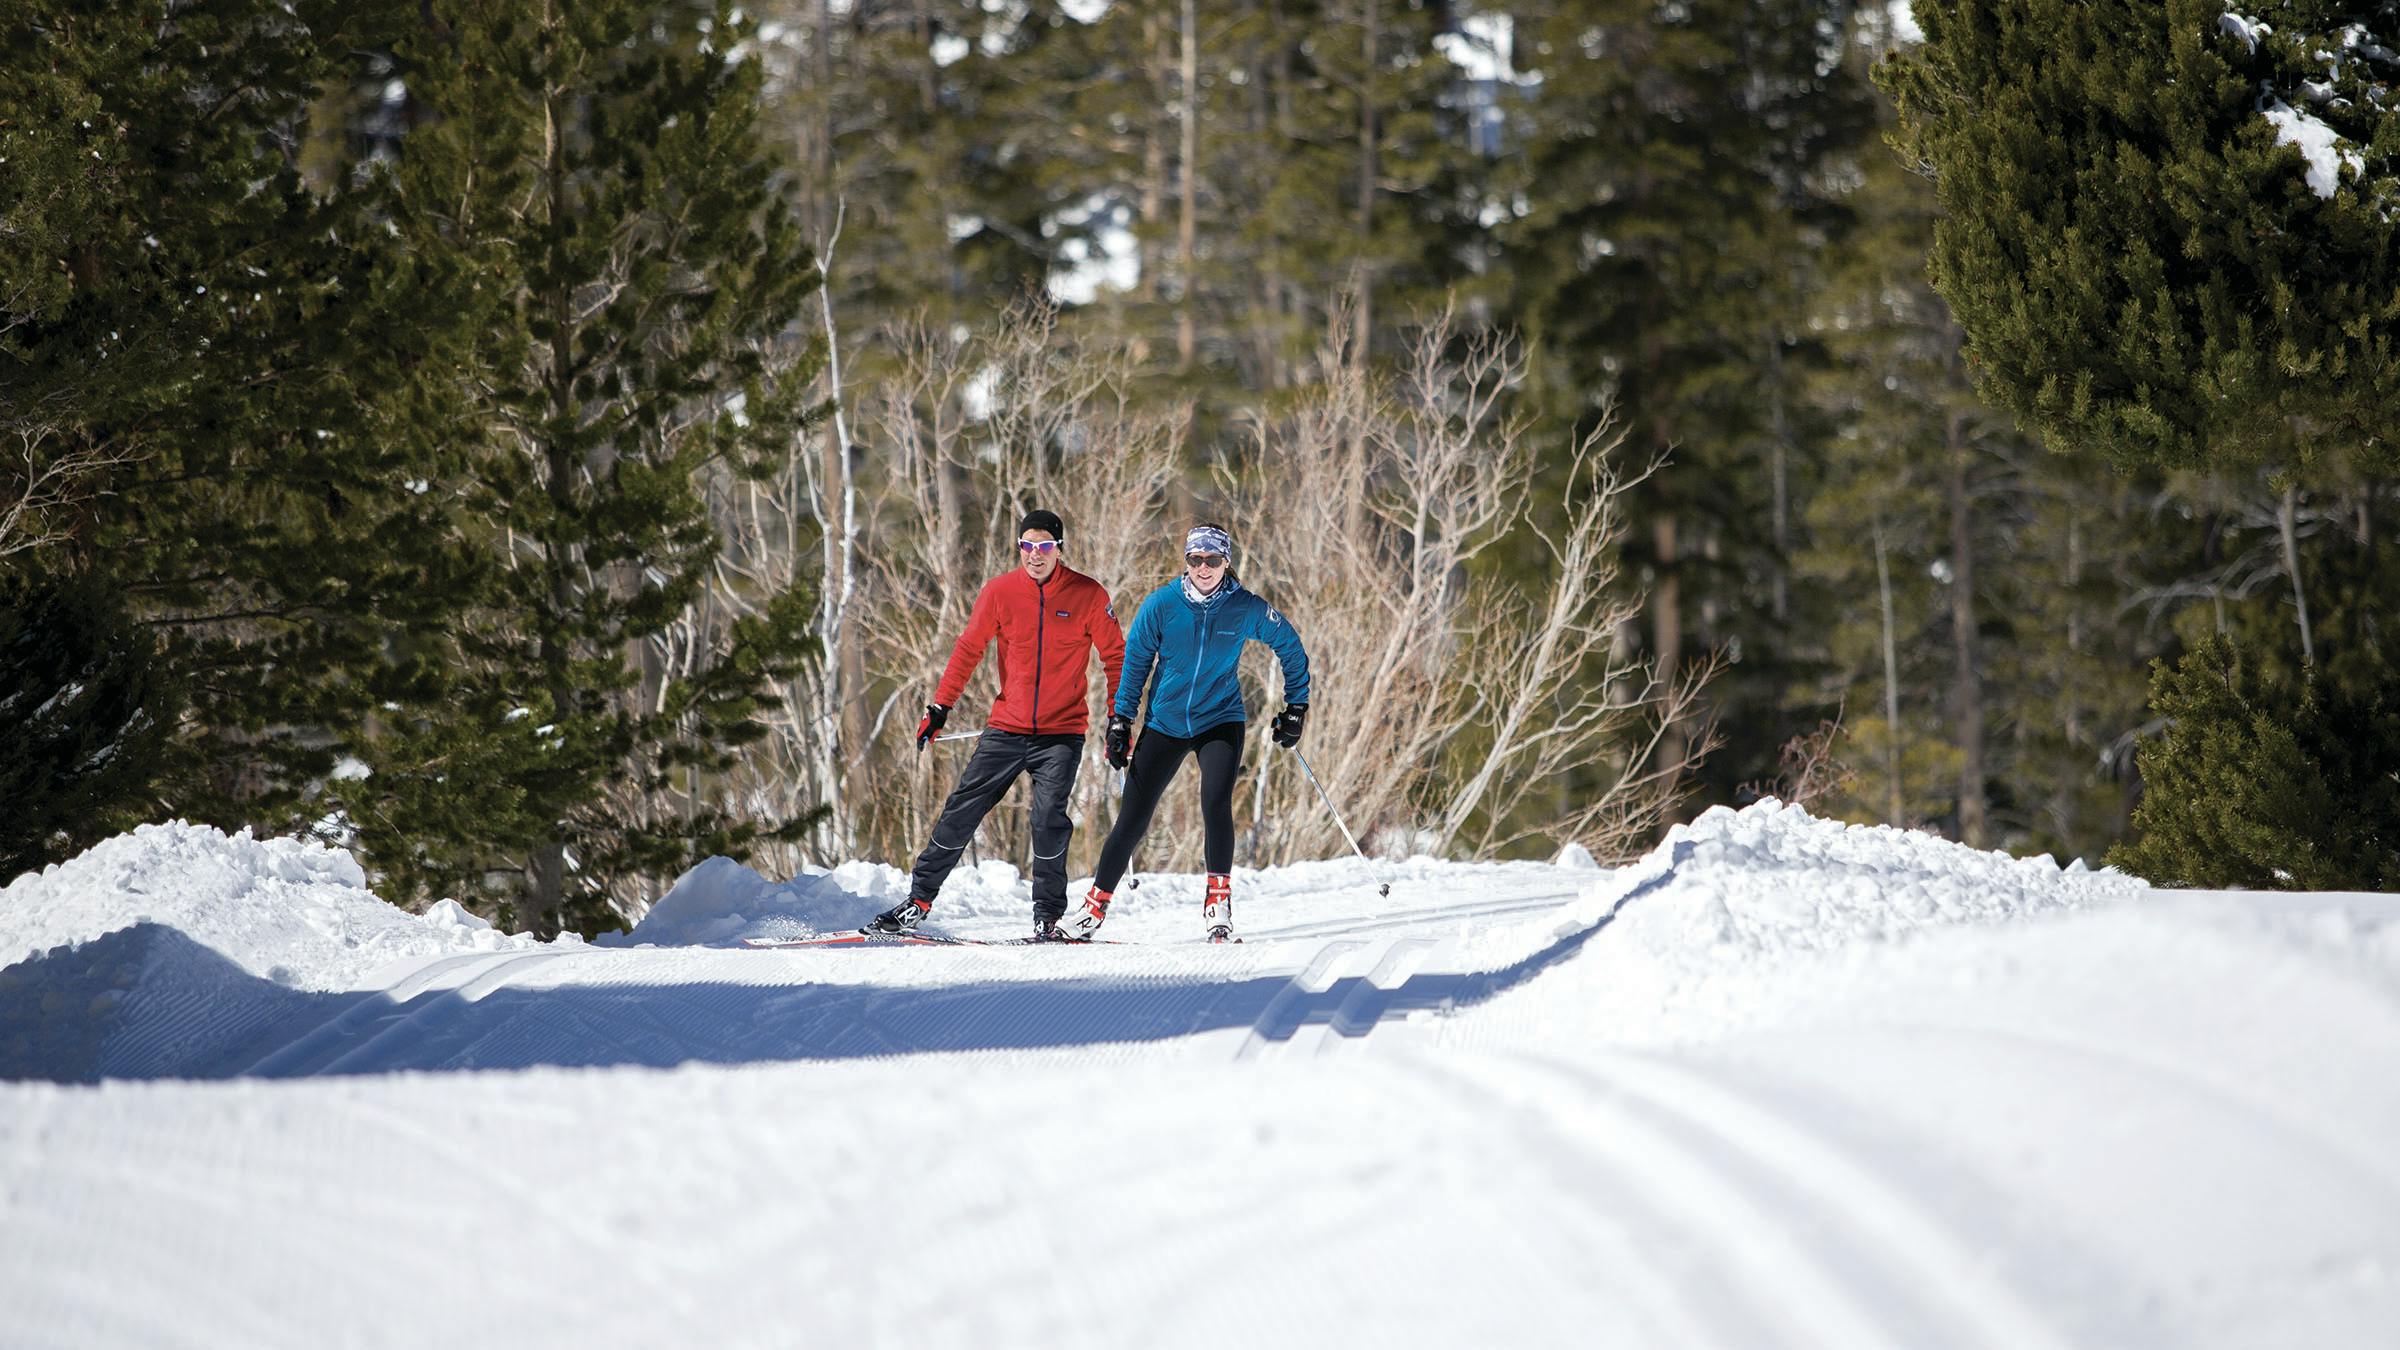 Two cross-country skiers on track